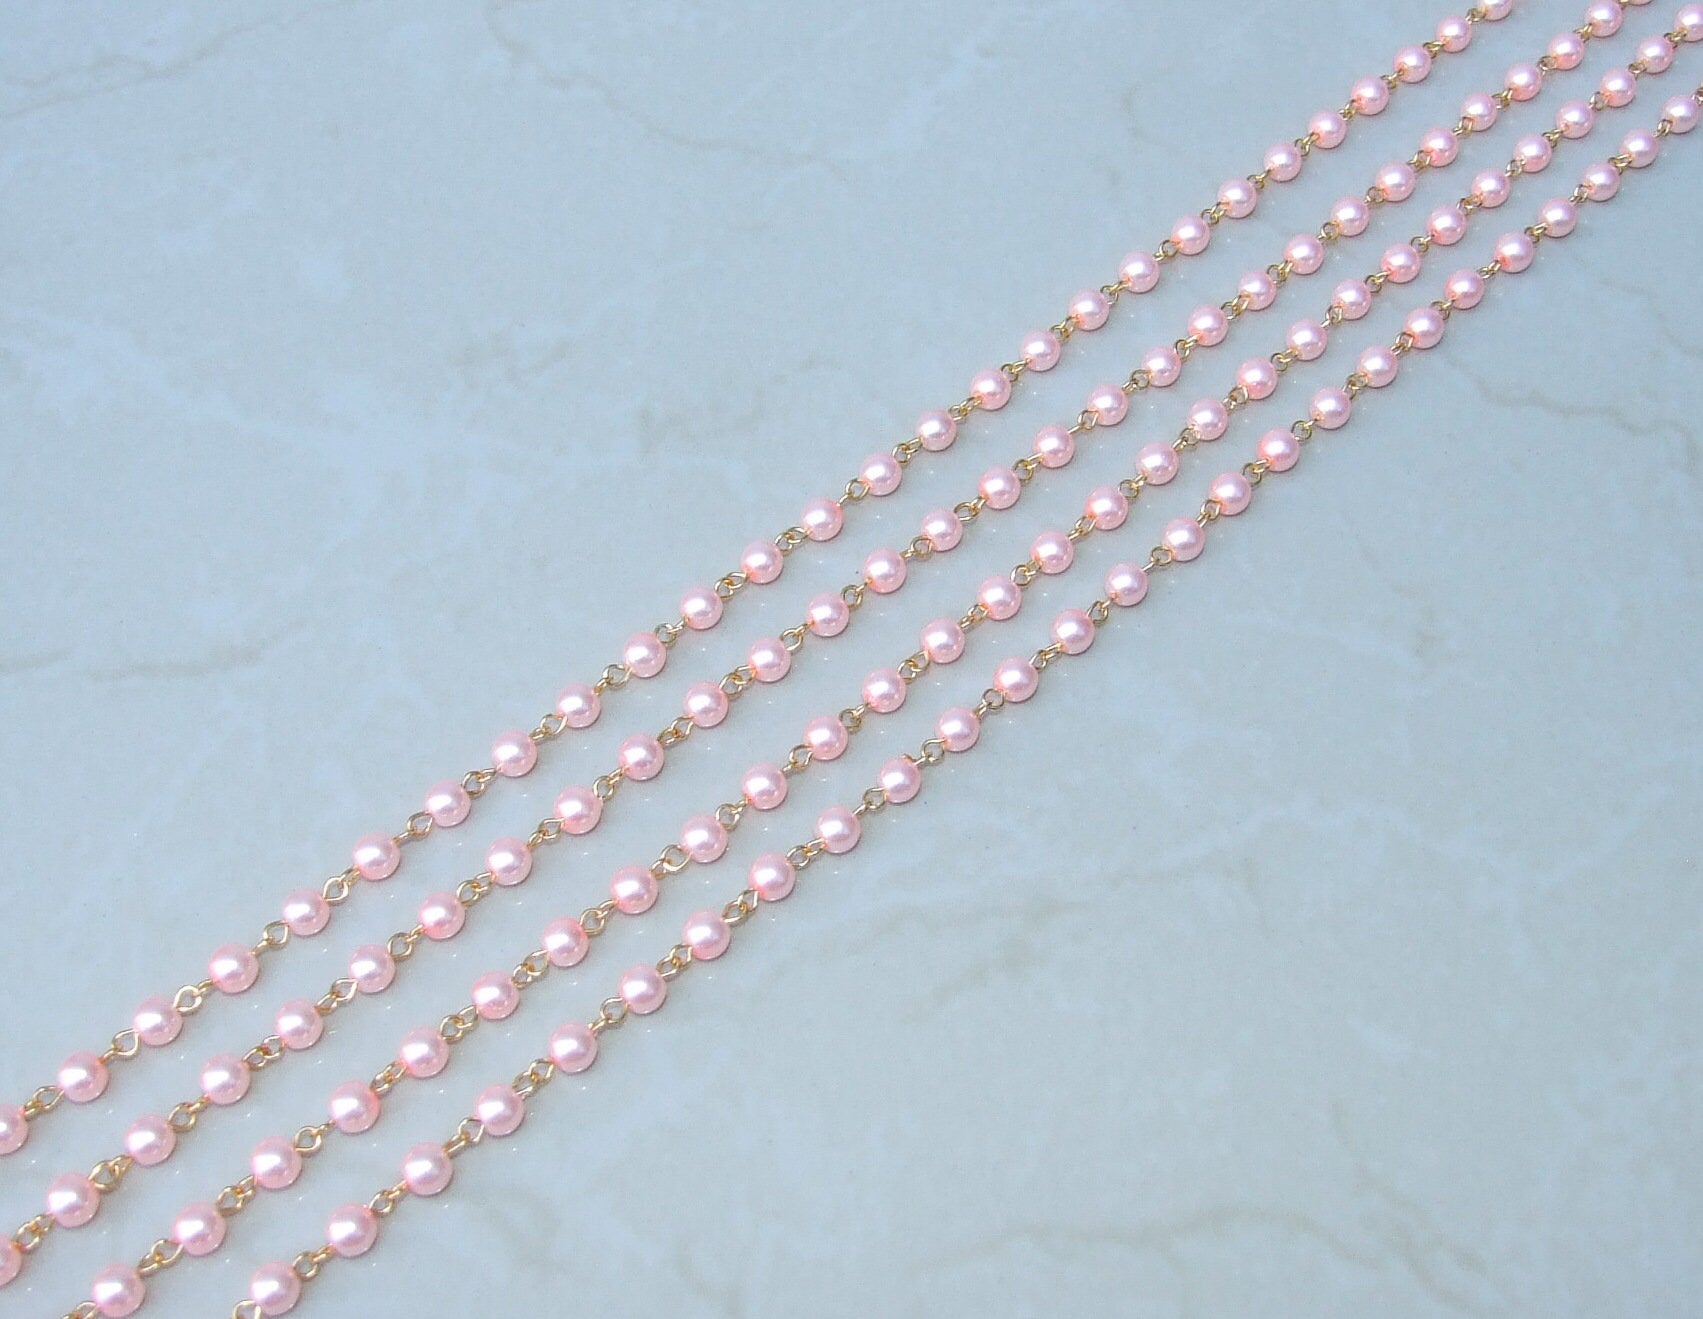 Pink Pearl Rosary Chain, 1 Meter, Bulk Chain, Round Glass Beads, Beaded Chain, Body Chain, Gold Chain, Necklace Chain, Belly Chain, 6mm, 604